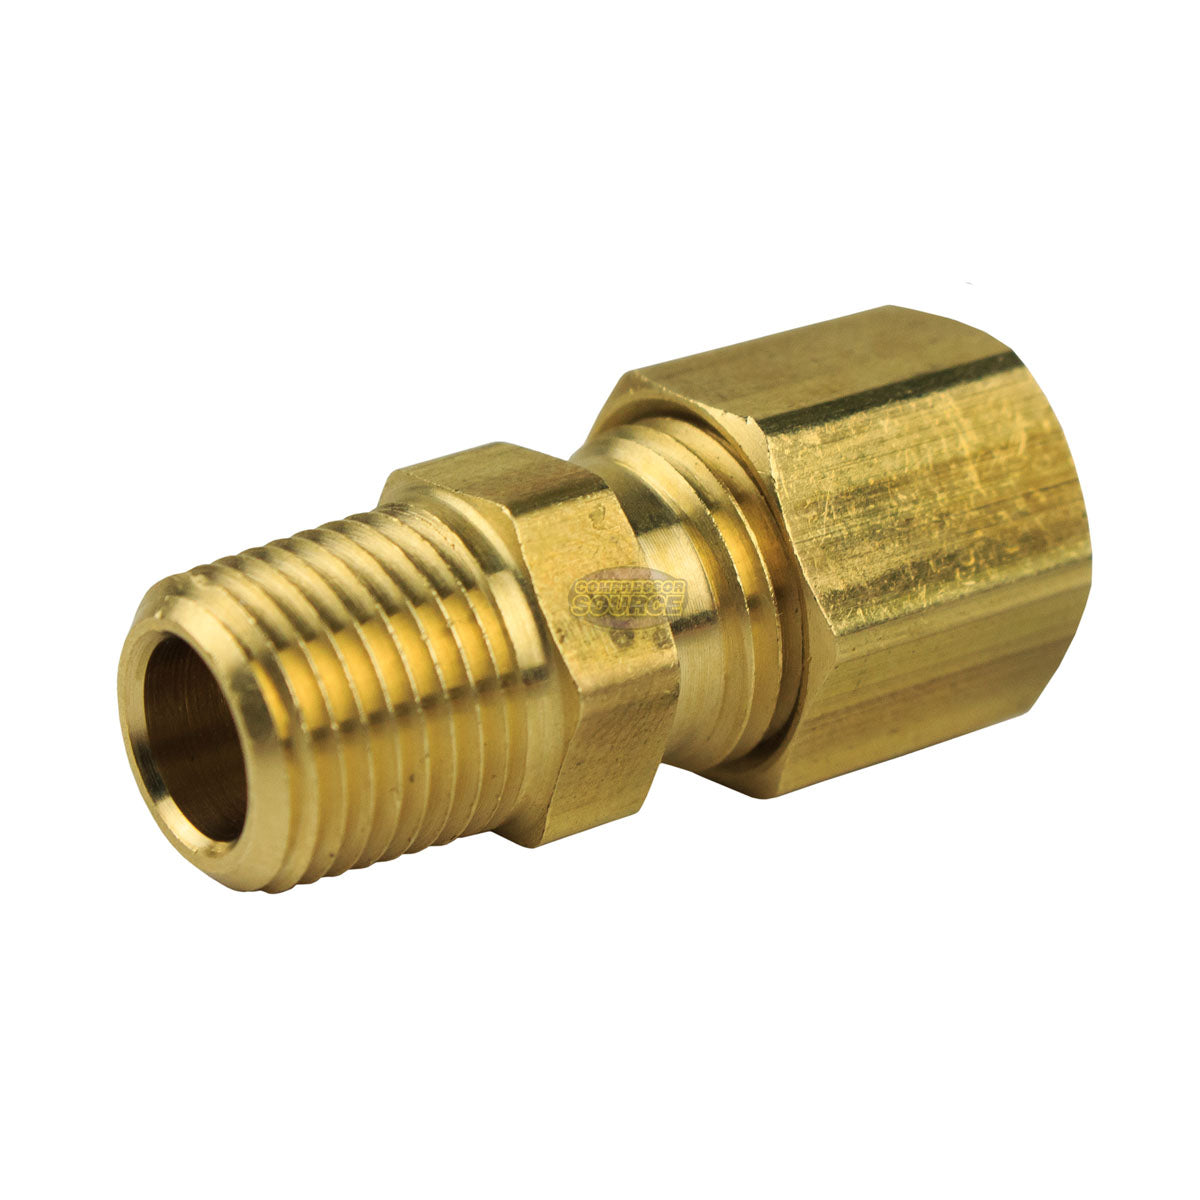 1/4 Inch Compression Nut Fitting Discounts Selling